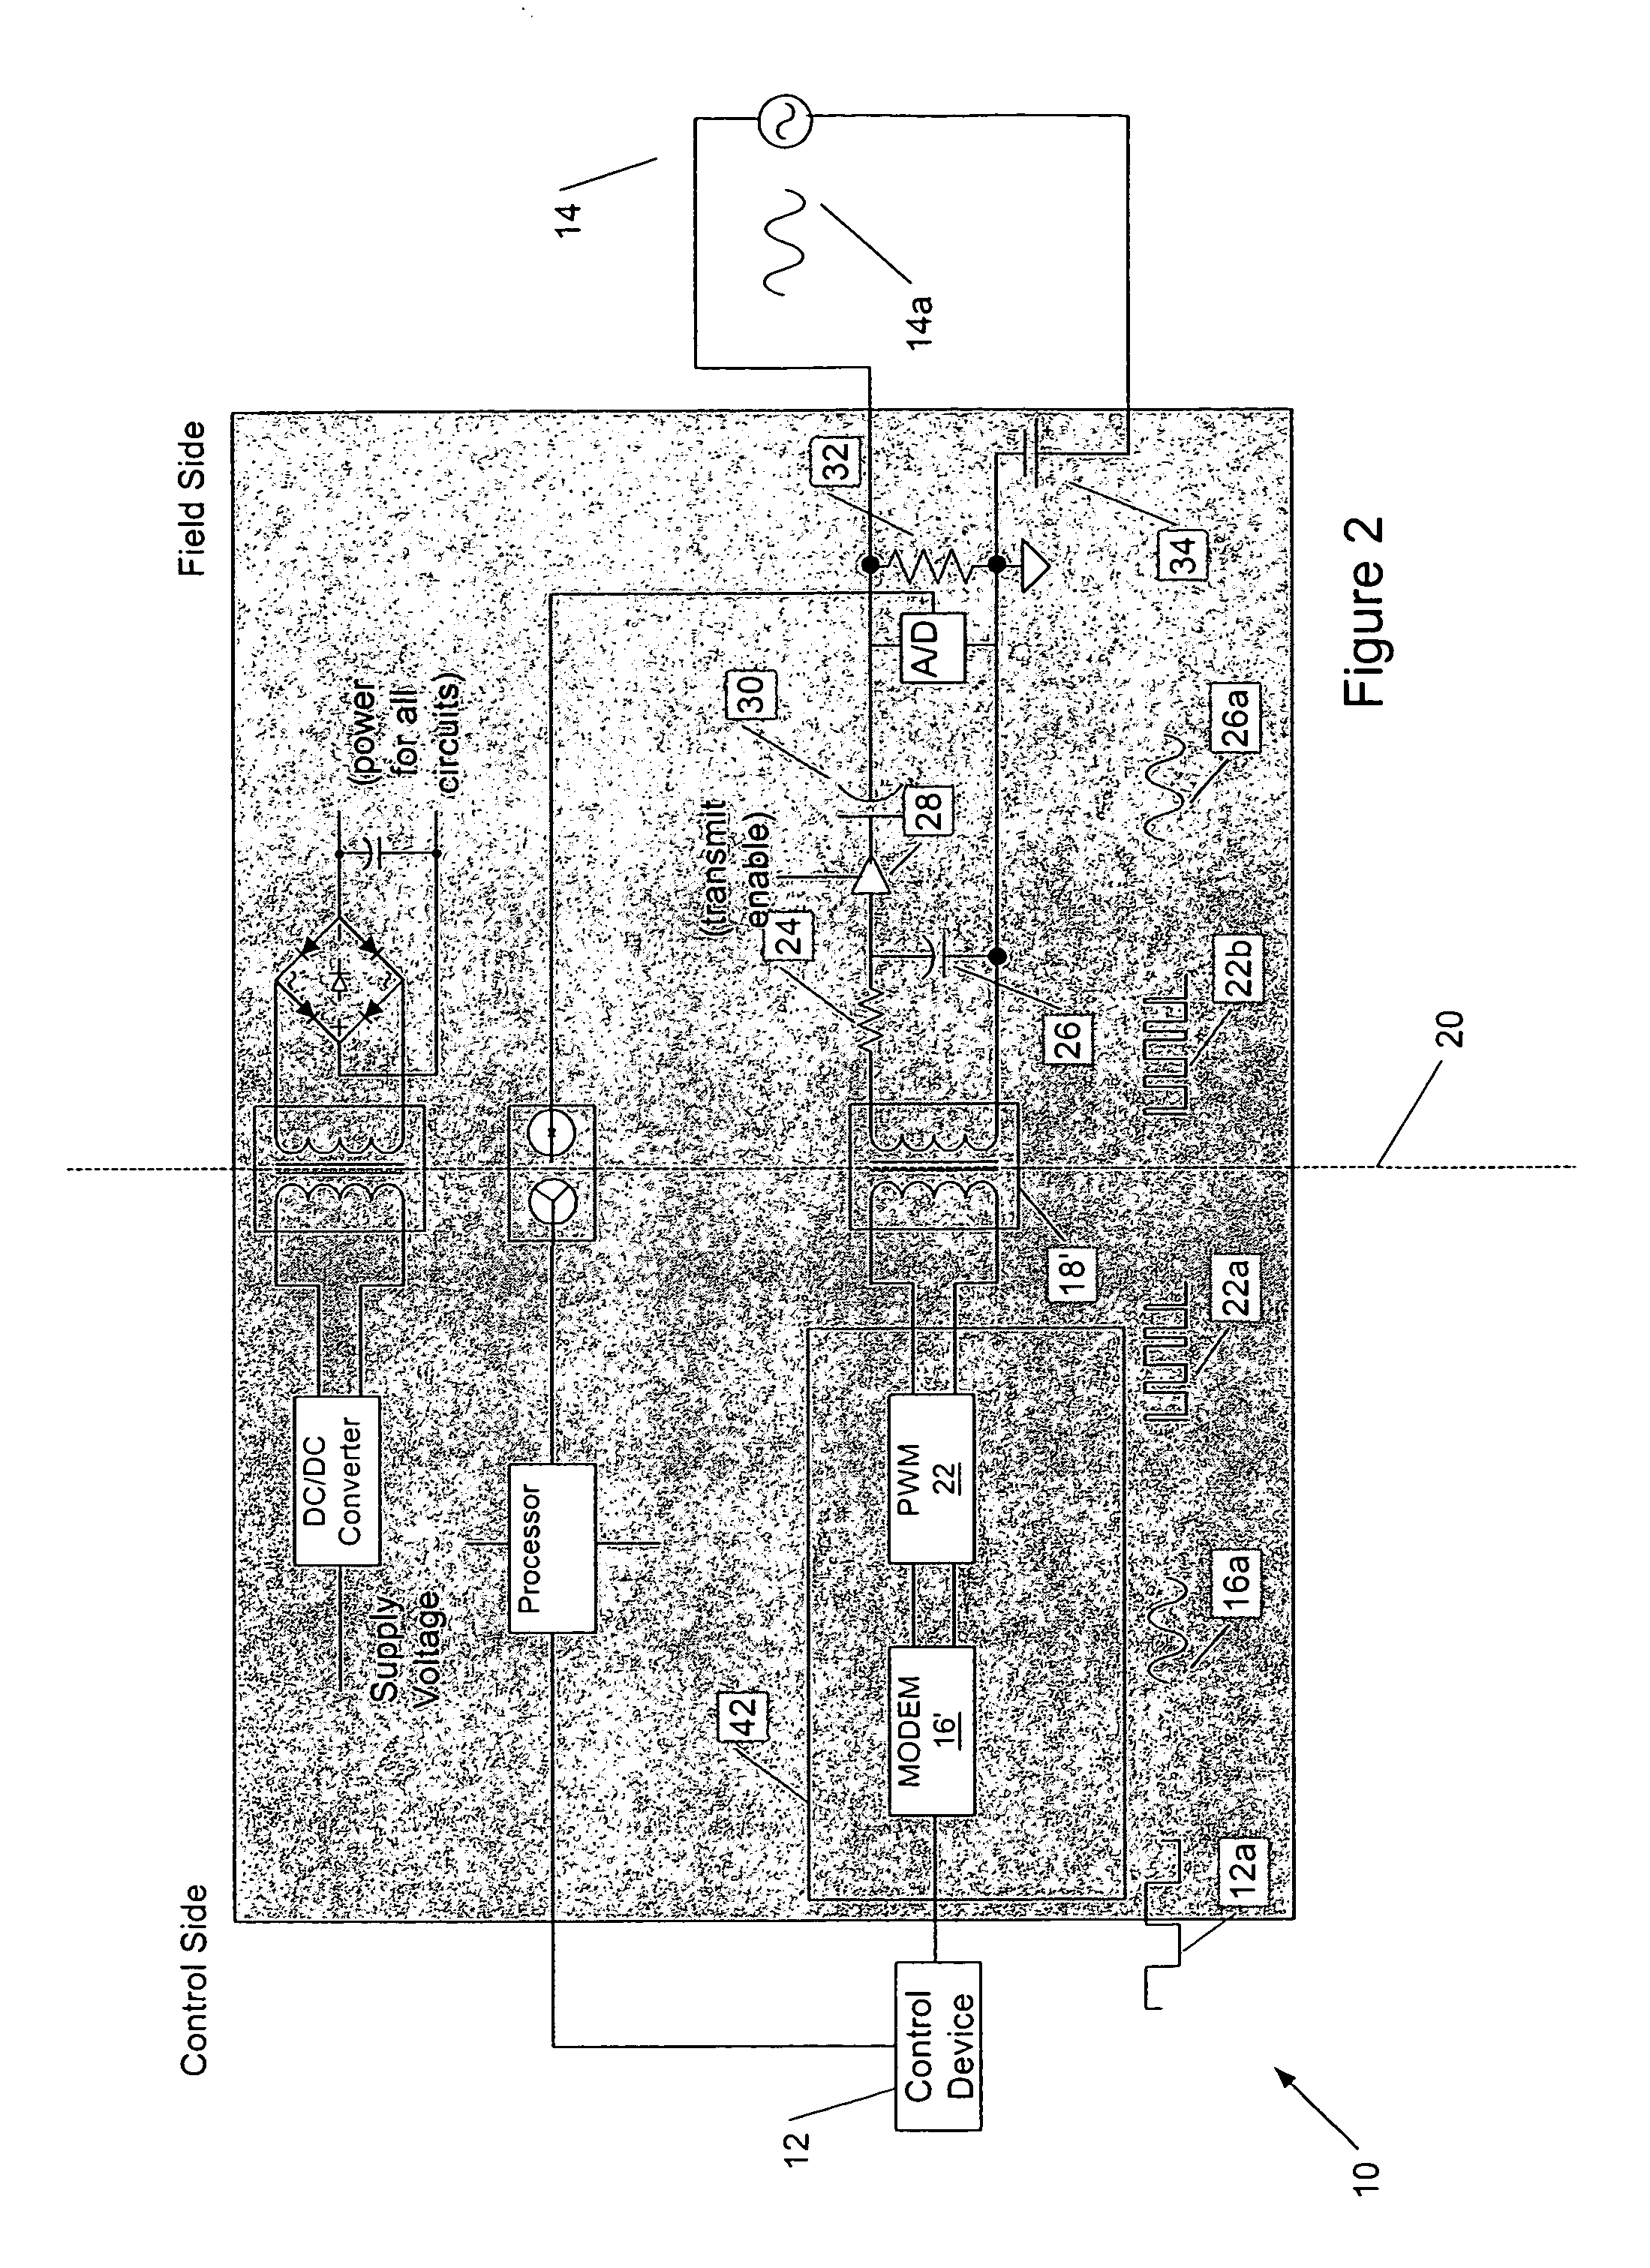 Control system methods and apparatus for inductive communication across an isolation barrier